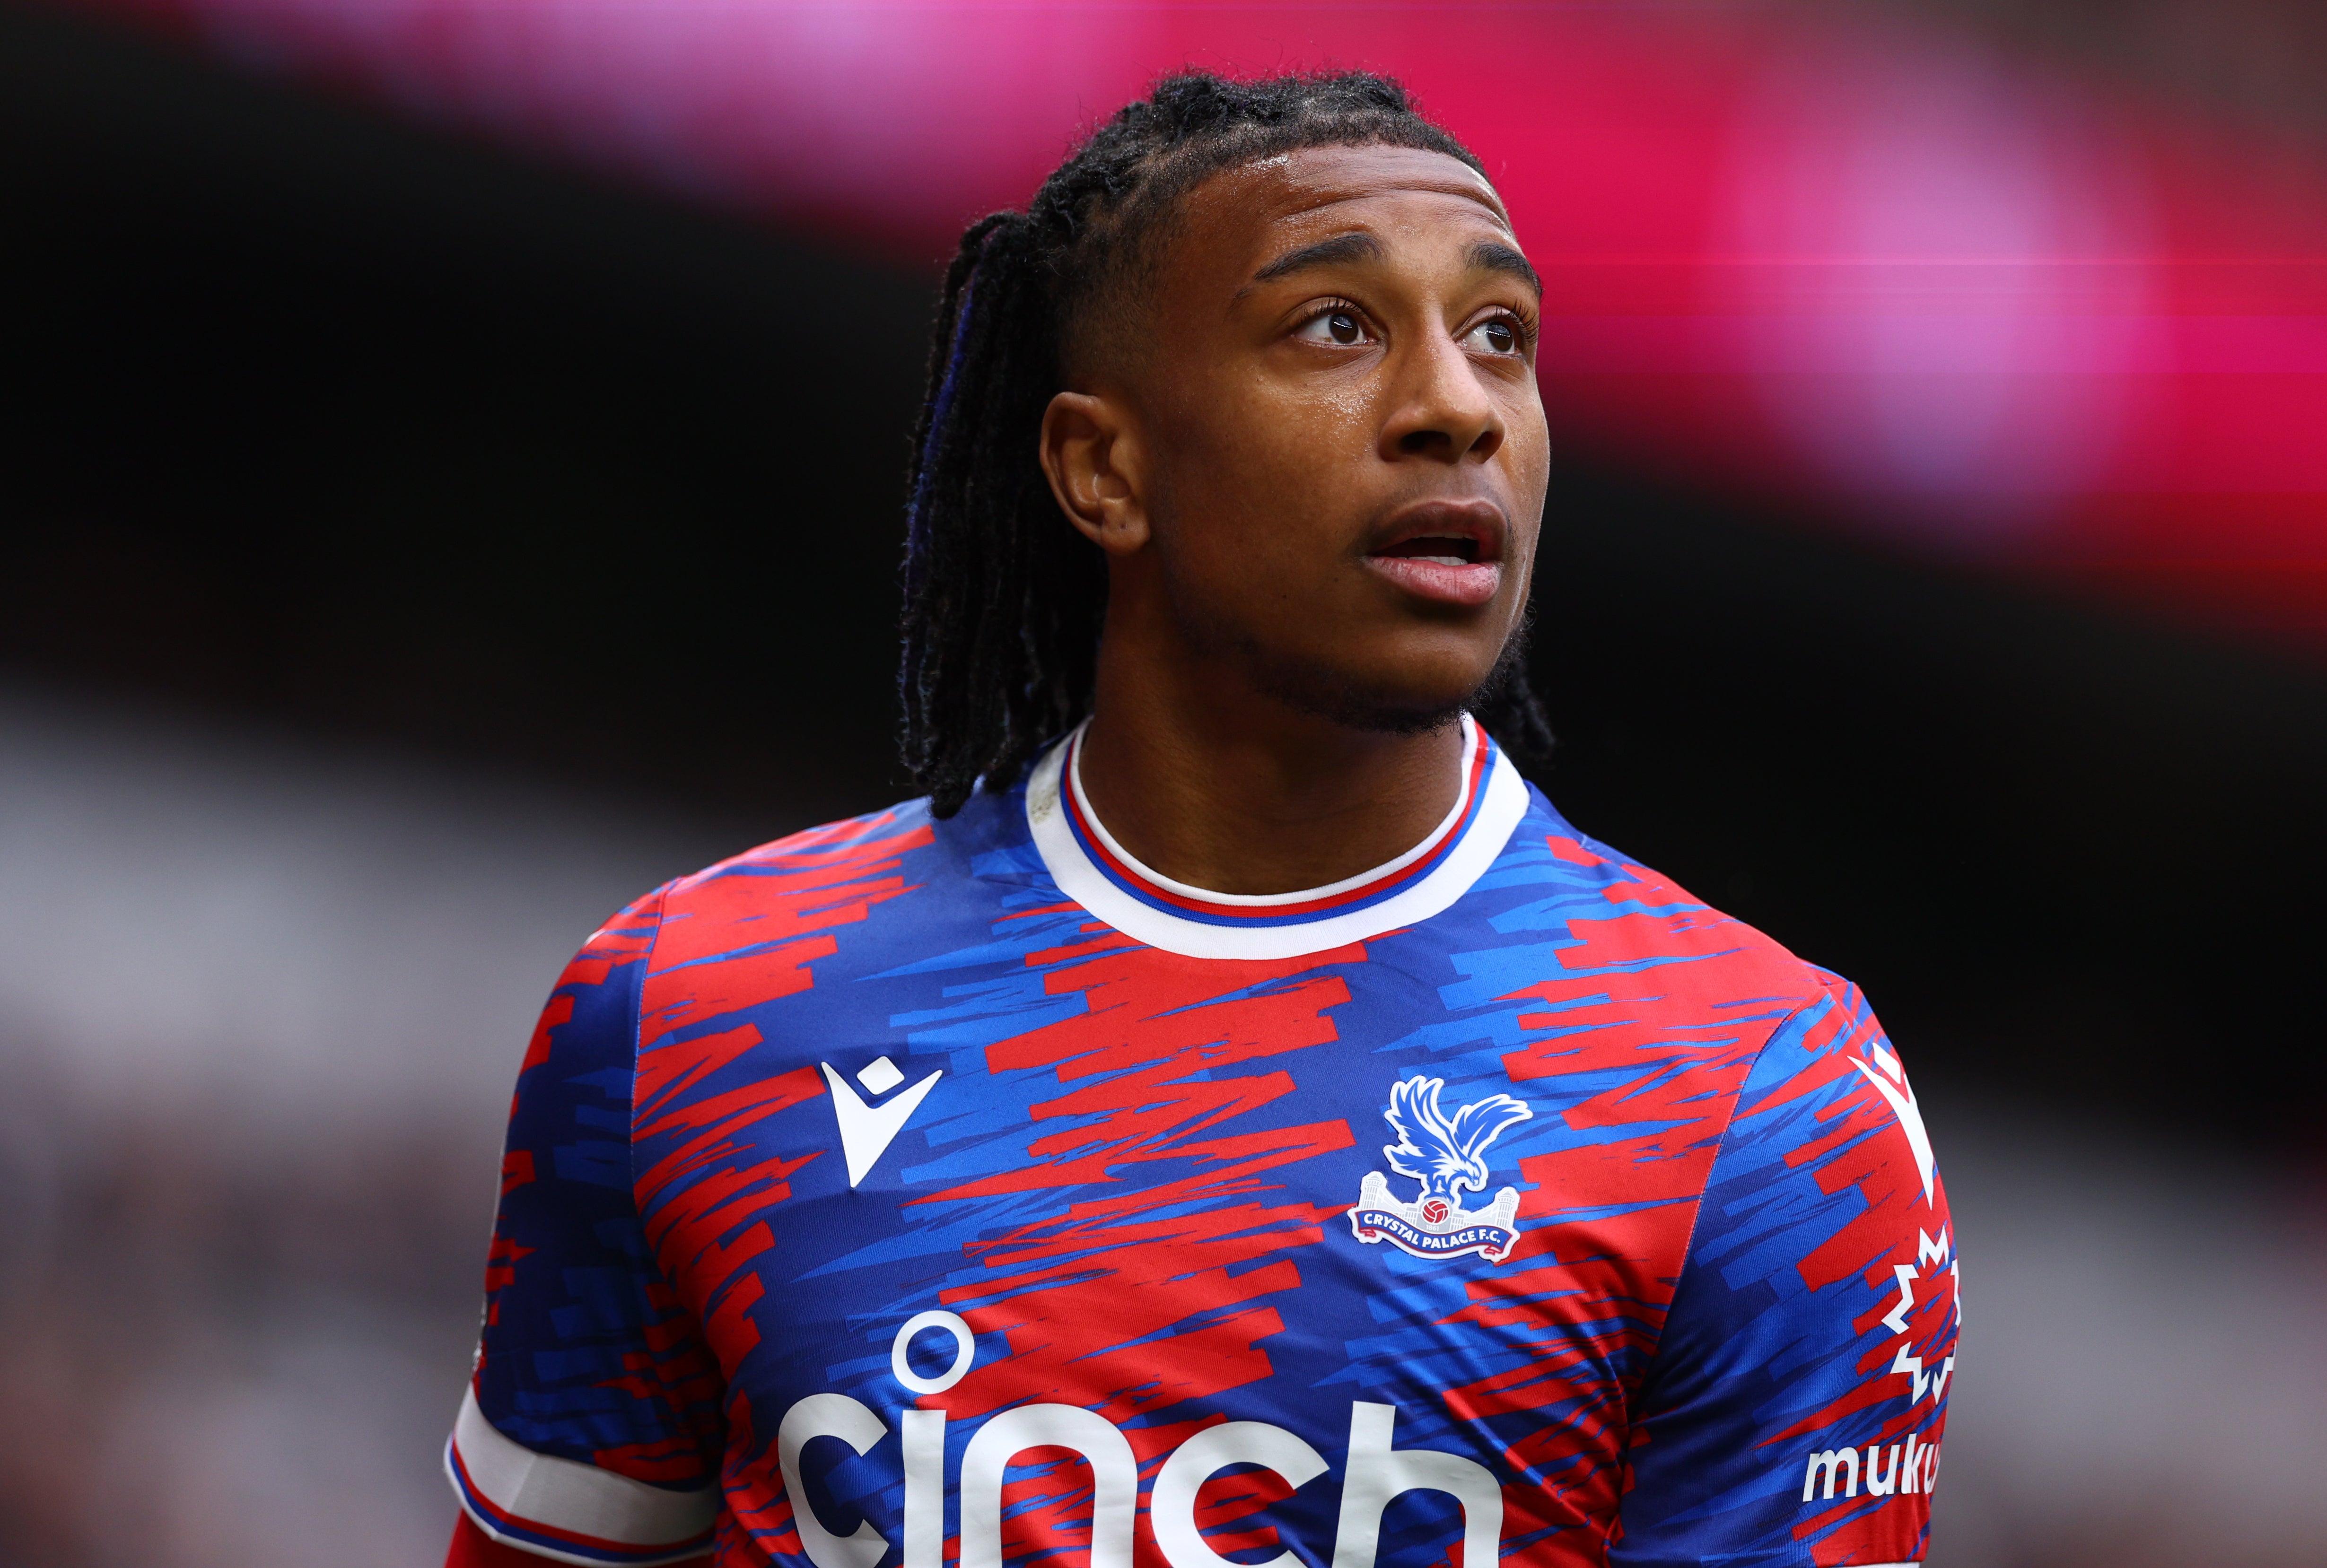  Michael Olise, a Crystal Palace player, is the subject of transfer rumors linking him to Chelsea.